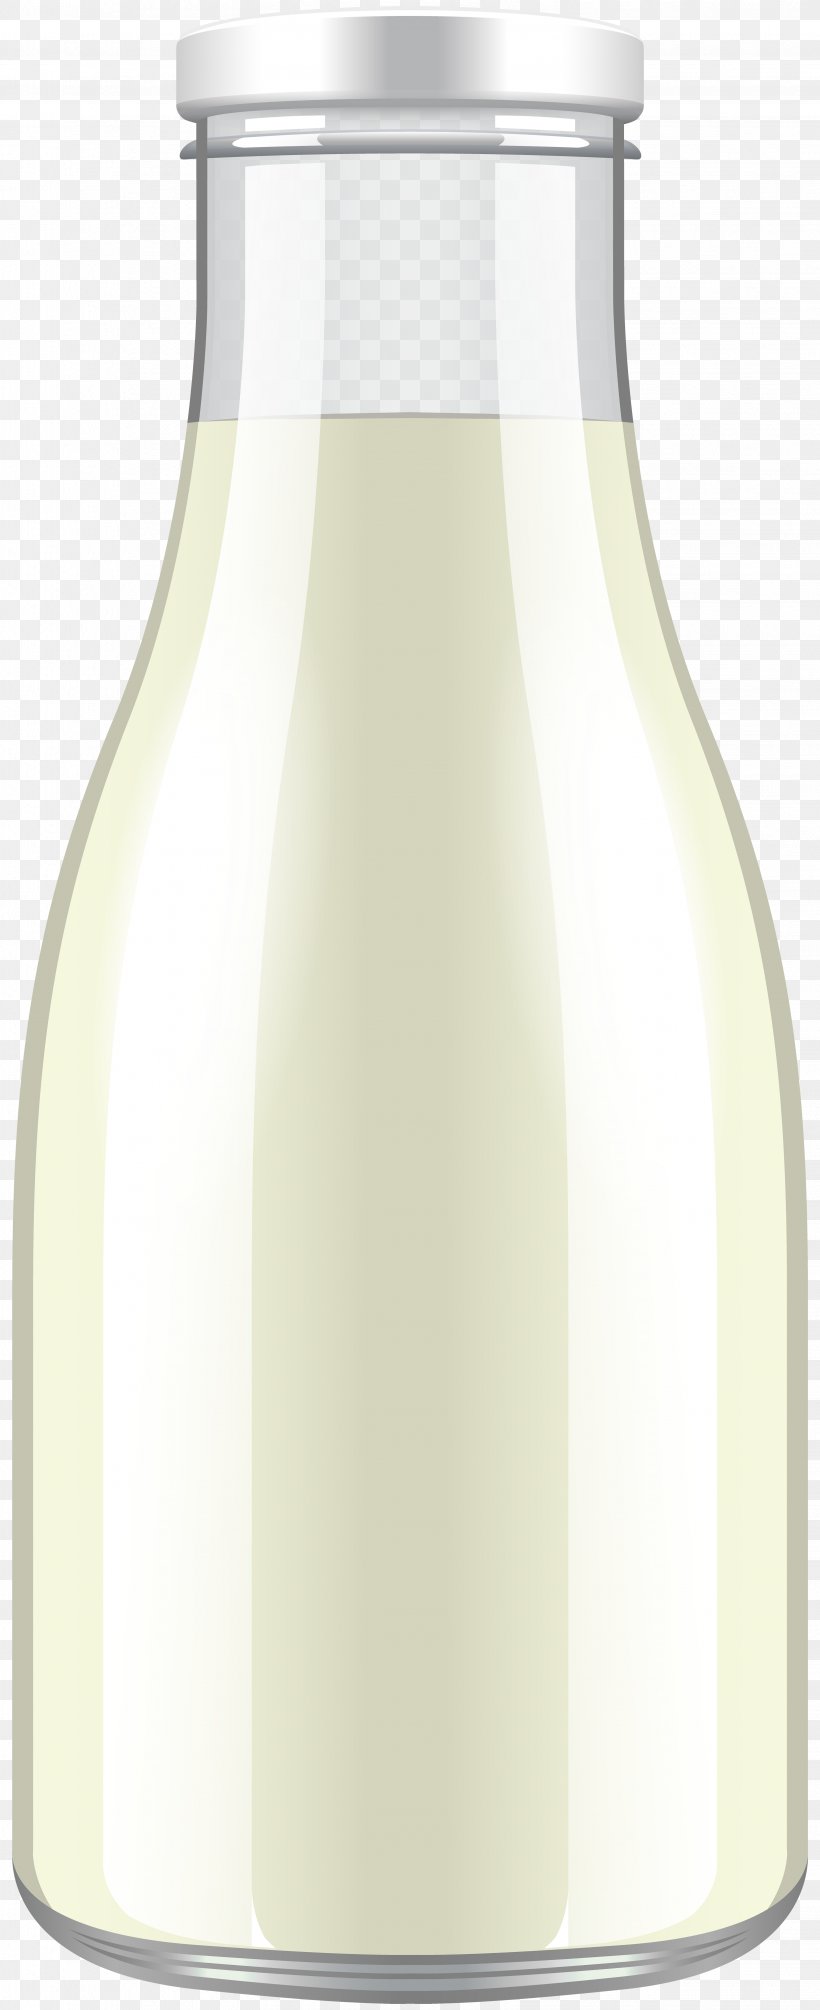 Glass Bottle, PNG, 3263x8000px, Glass, Bottle Download Free